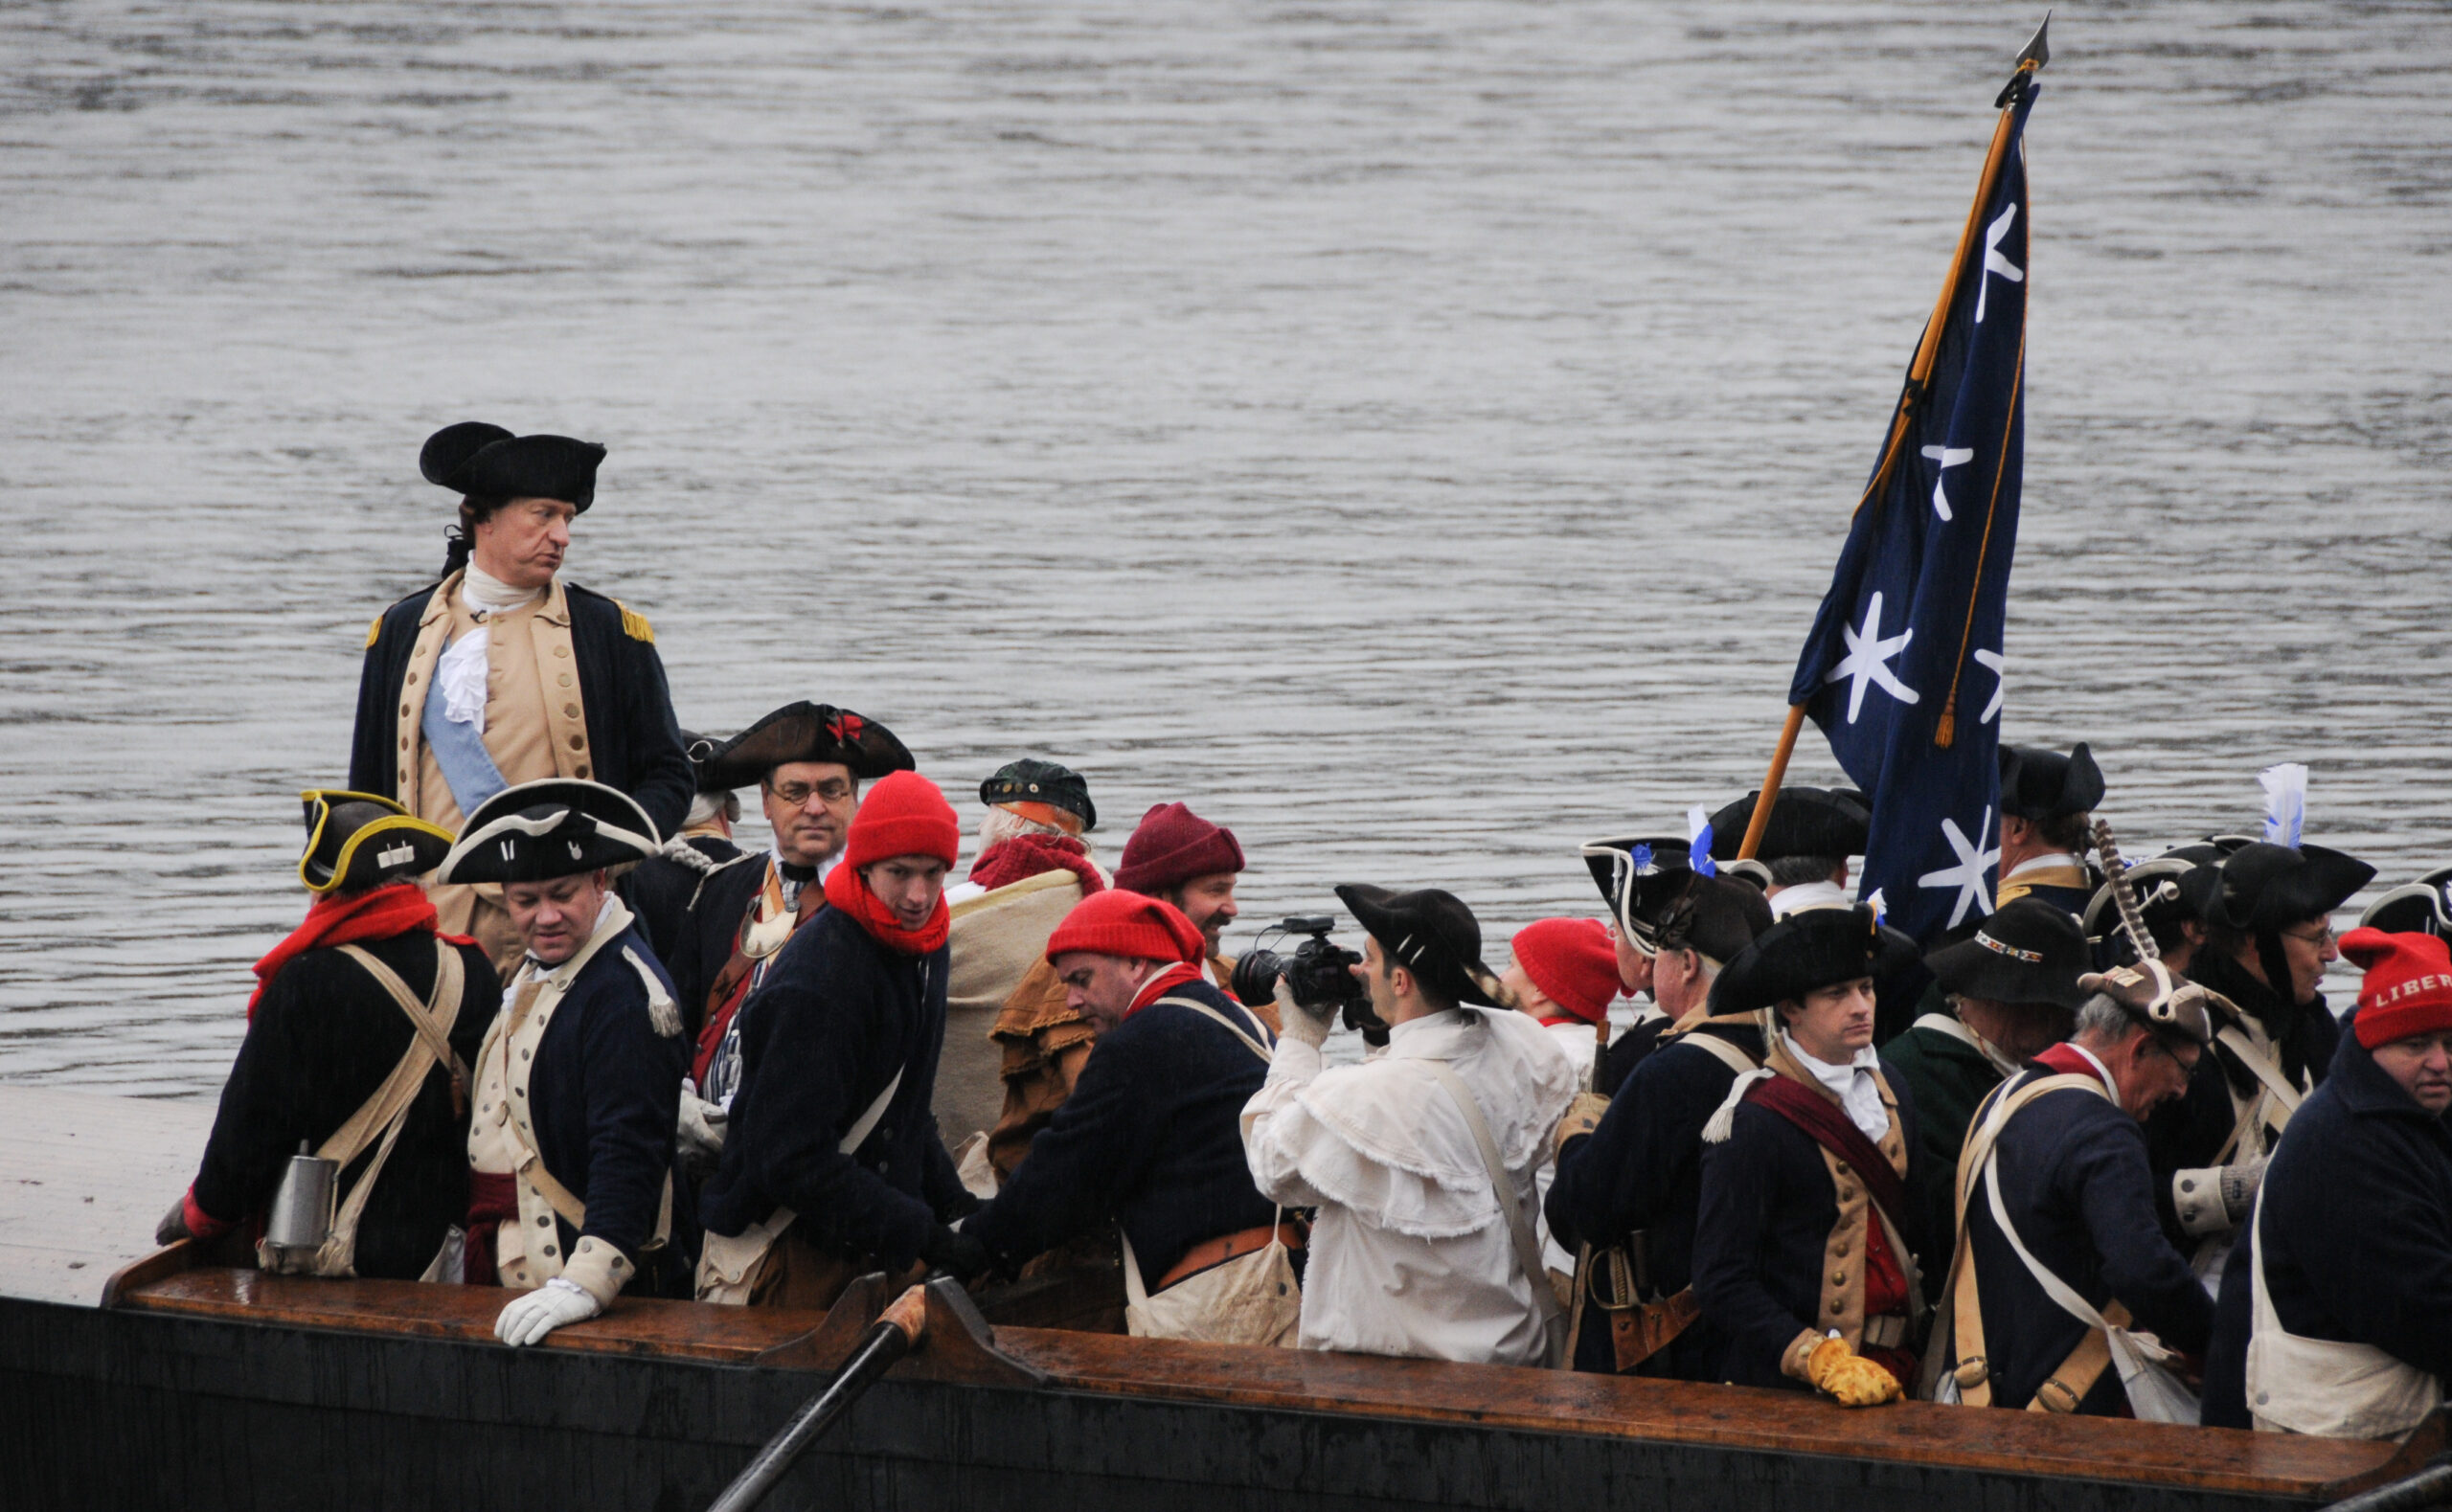 Members of the Washington Crossing Re-enactors Society portray Gen. George Washington and his troops during a Dec. 9 dress rehearsal for the 60th Annual Crossing of the Delaware re-enactment scheduled for Christmas day at Washington Crossing Historic Park, Pa. Each December, thousands of people gather on the New Jersey and Pennsylvania banks of the Delaware River to watch the re-enactment of George Washington's 1776 river crossing during the American Revolution.